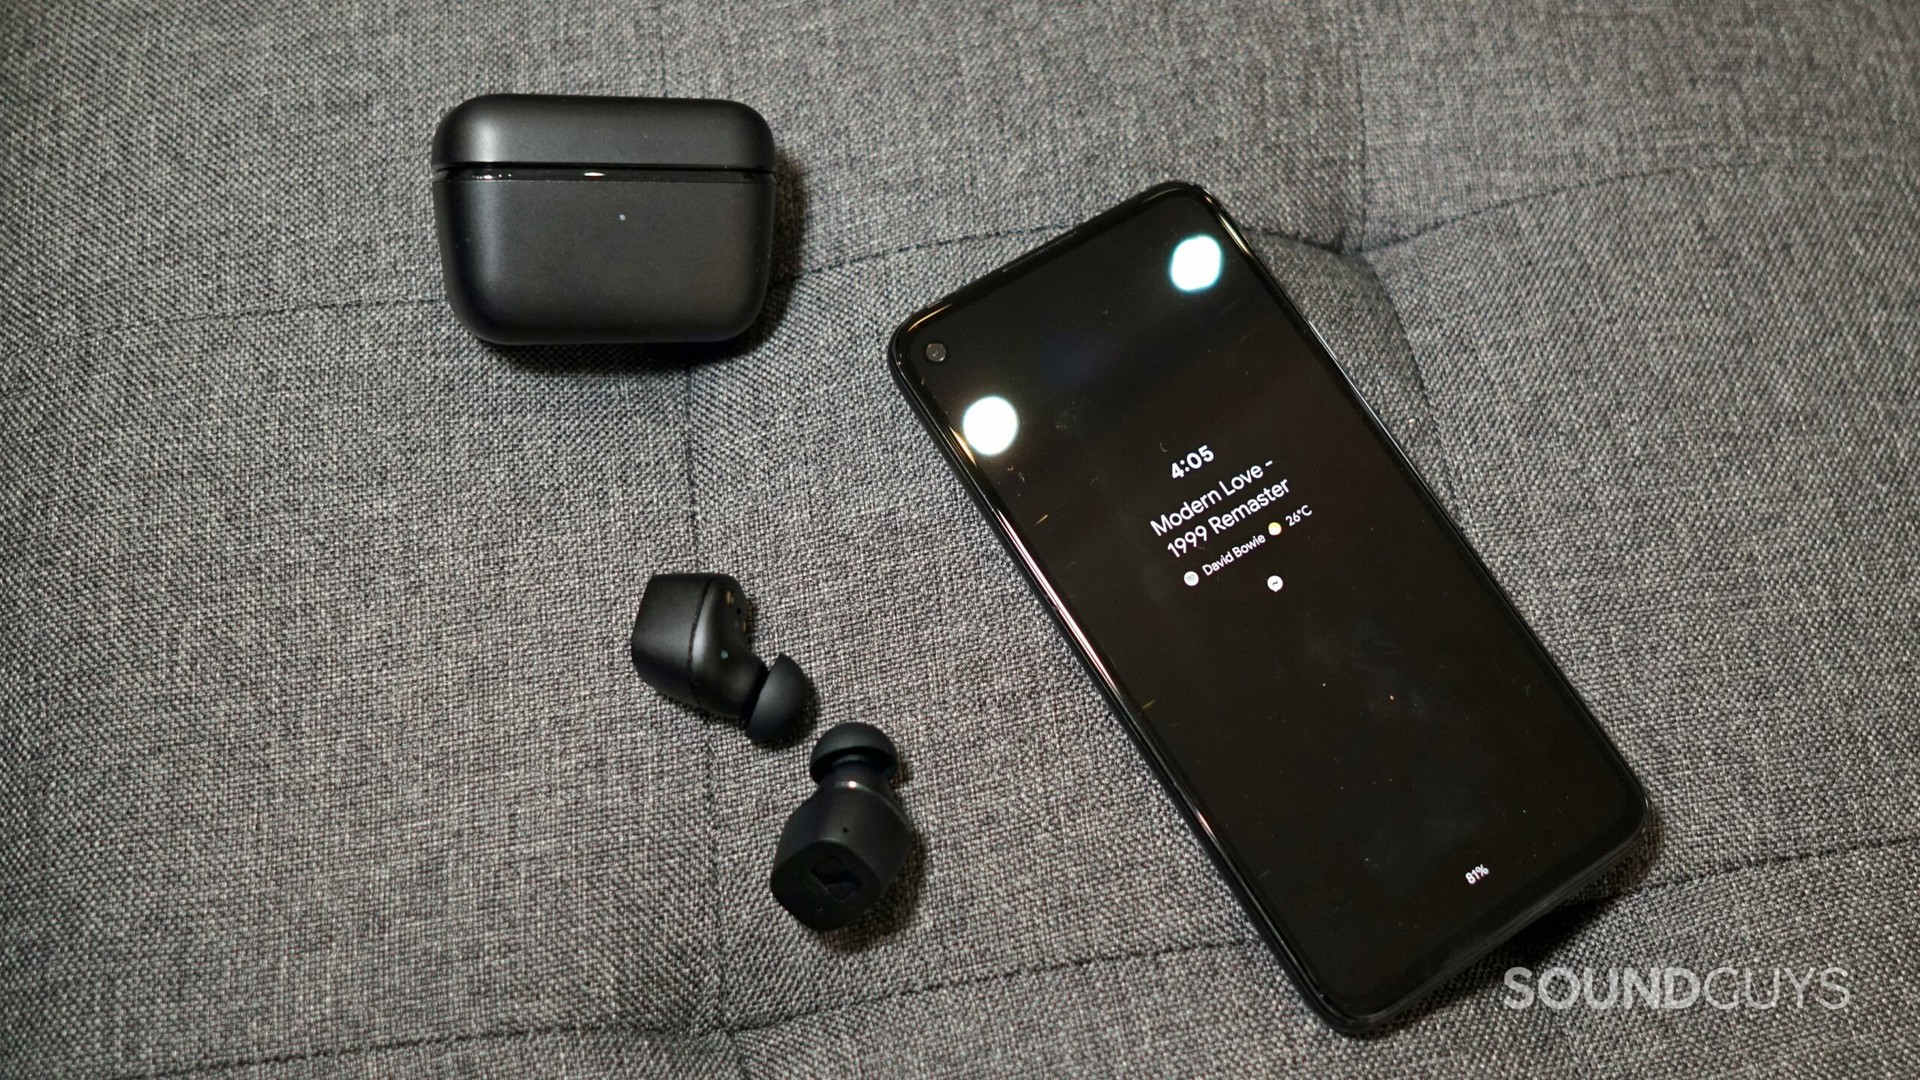 Sennheiser CX True Wireless Earbuds and a case next to the phone.